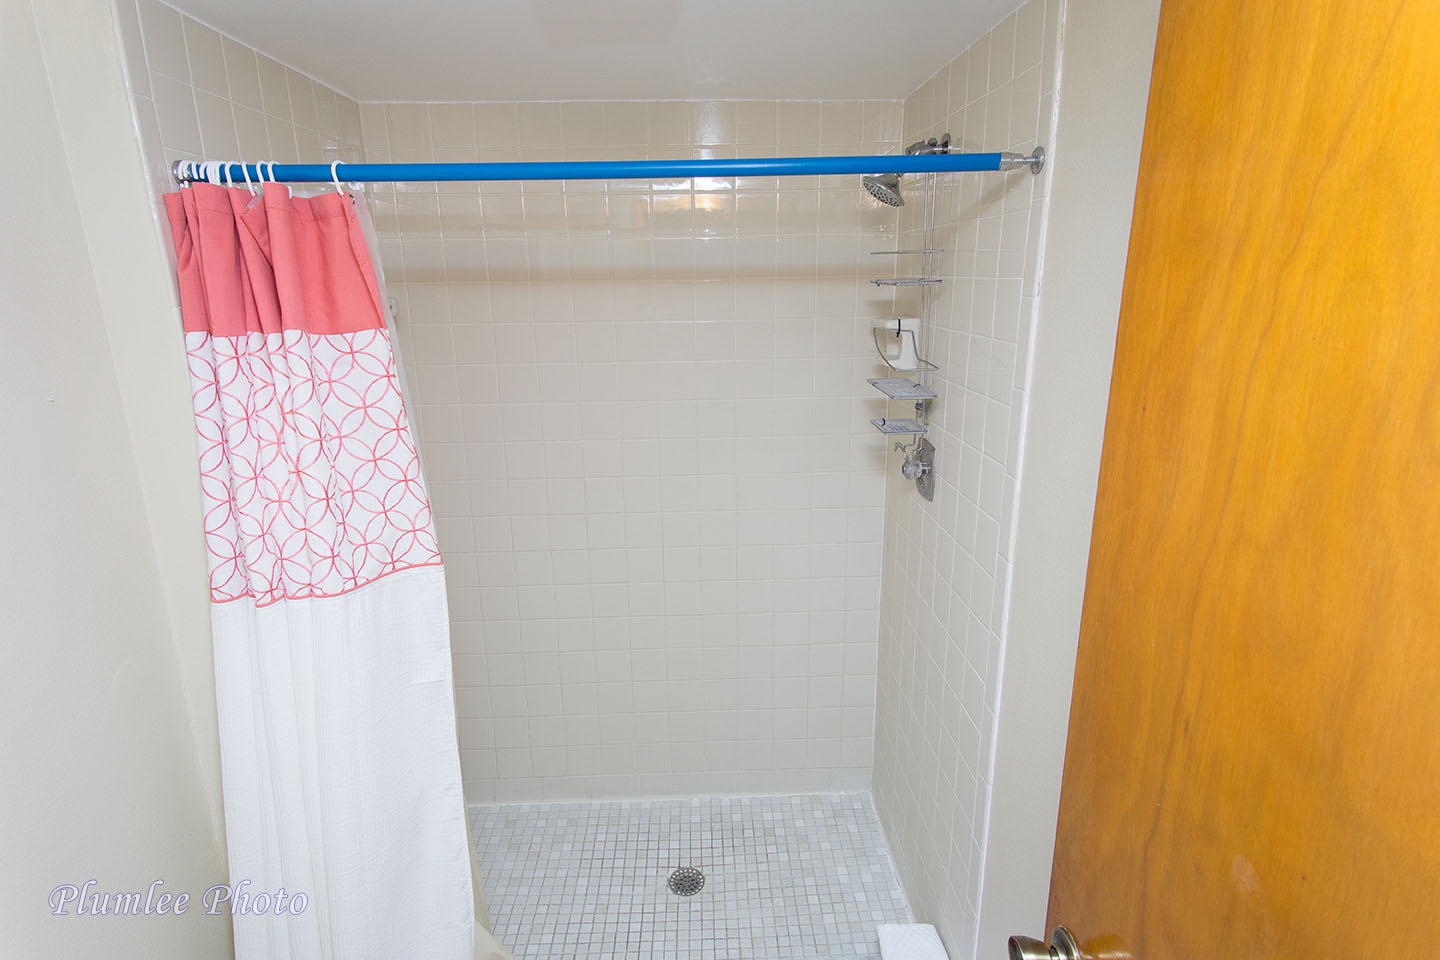 A step in shower is helpful for people with mobility issues.